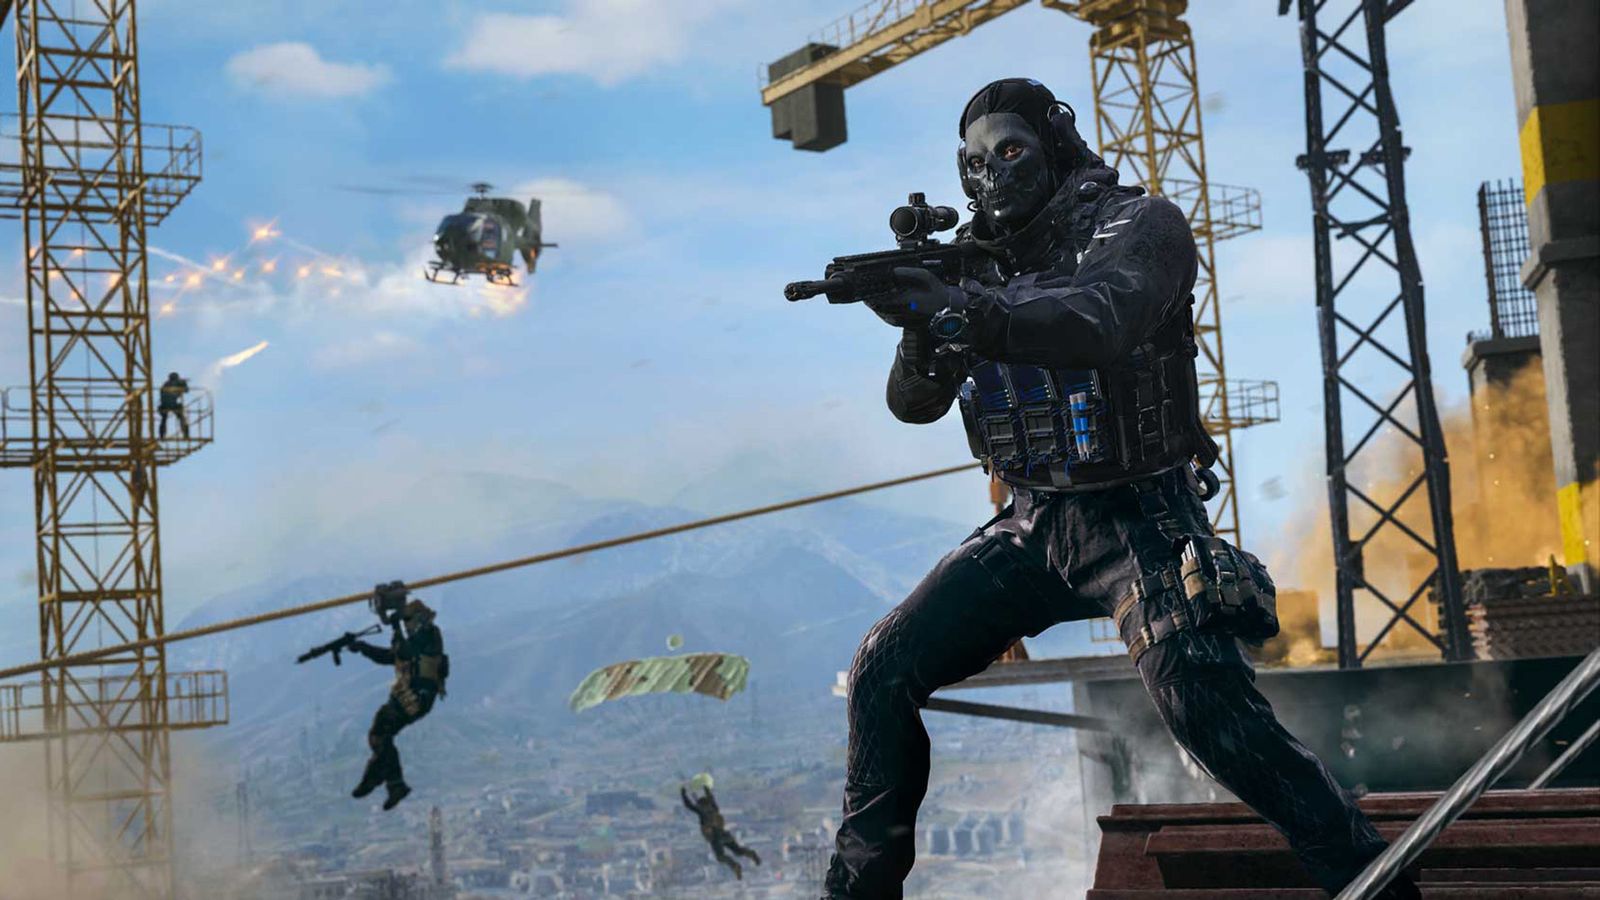 Warzone player aiming with sniper rifle with parachuting players, helicopter and player using zipline in background